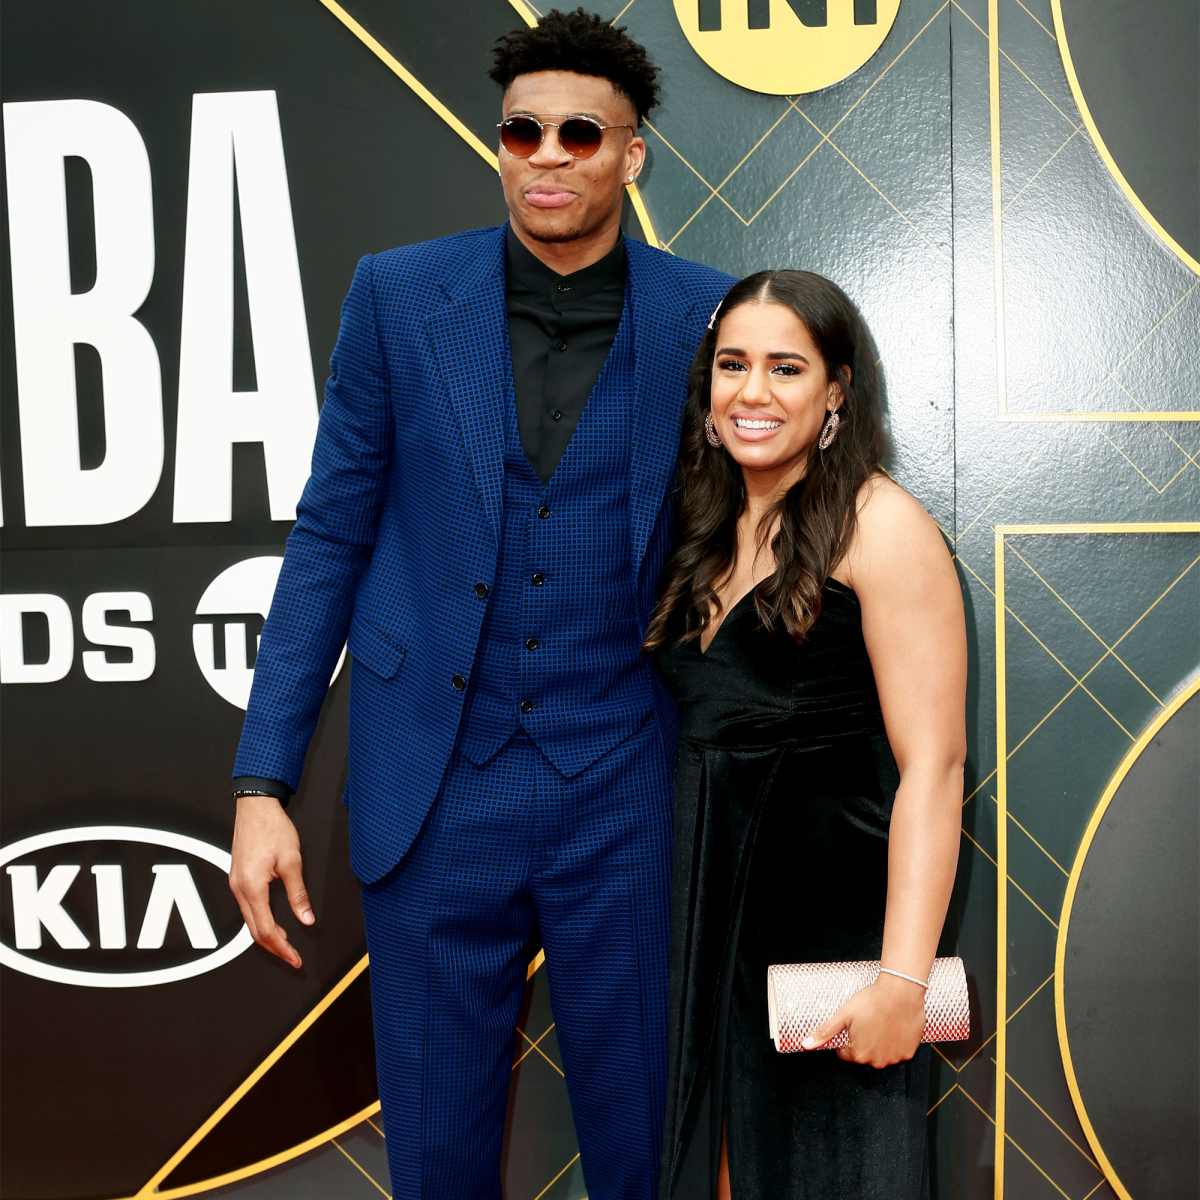 Giannis Antetokounmpo Outfit from March 17, 2021